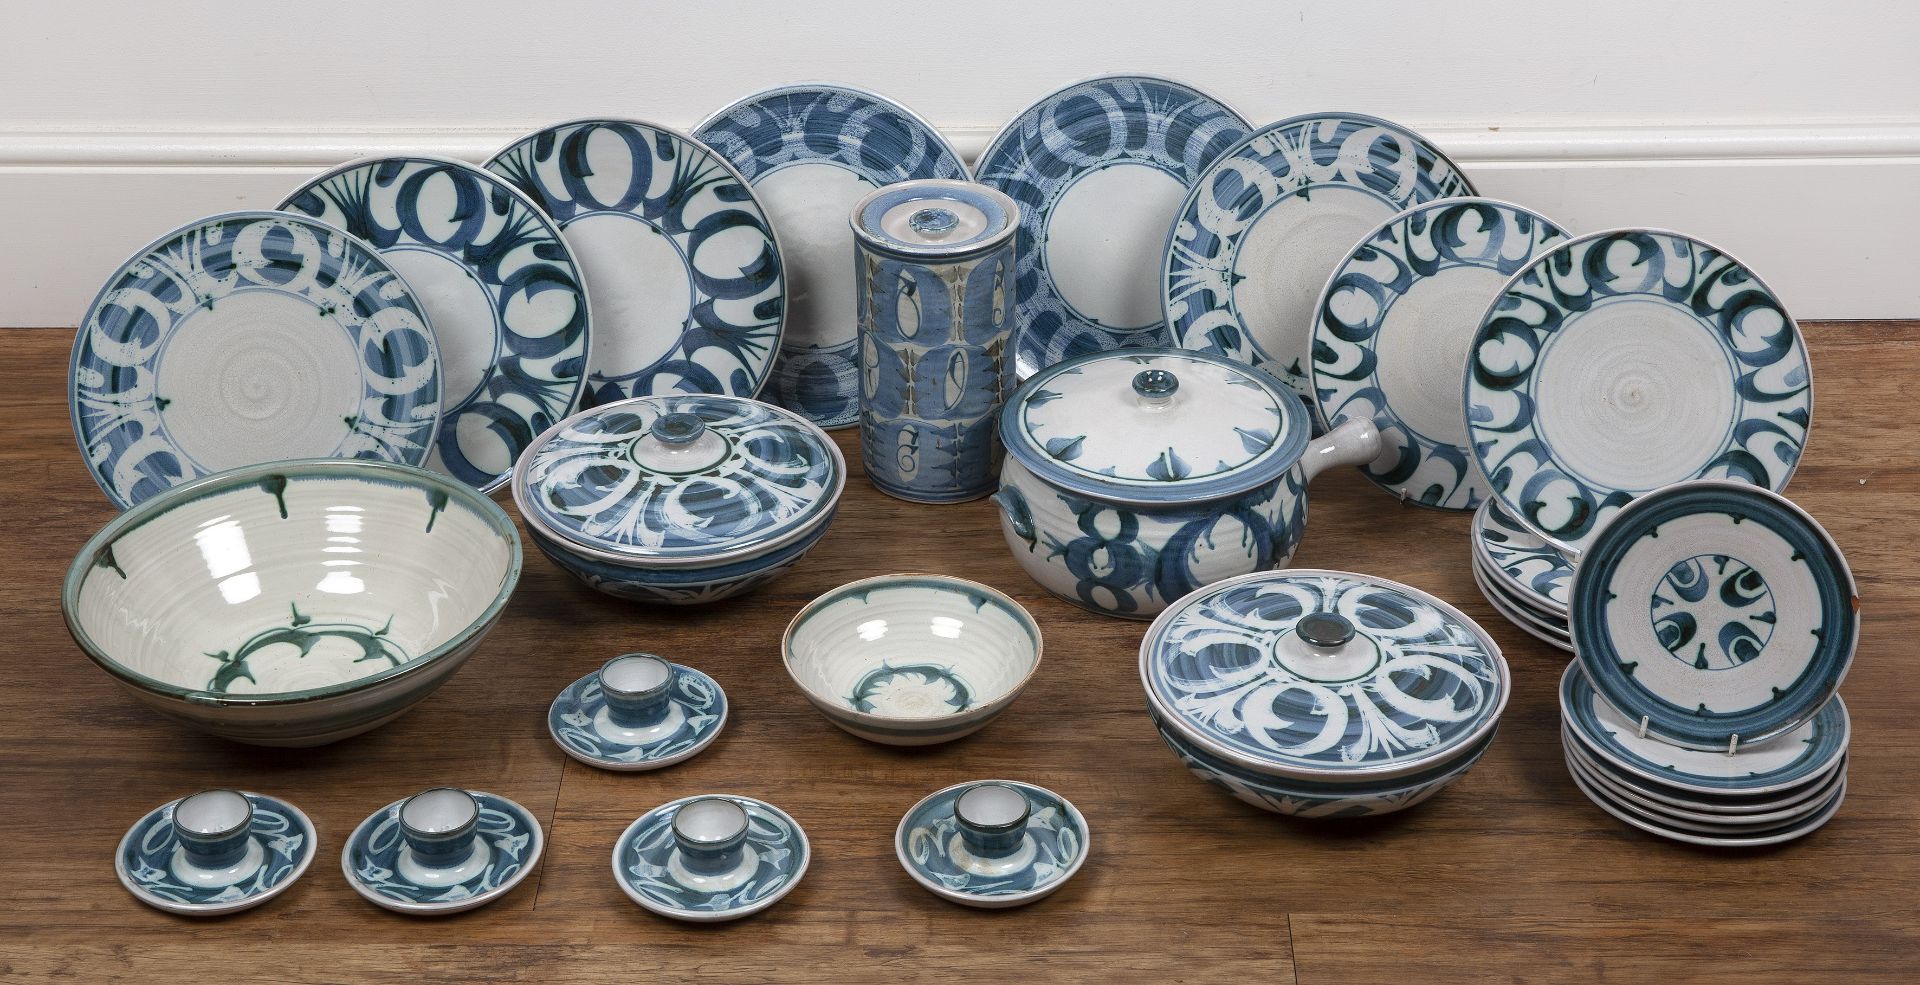 Alan Caiger-Smith (1930-2020) at Aldermaston Pottery tin-glazed earthenware dinner service, to